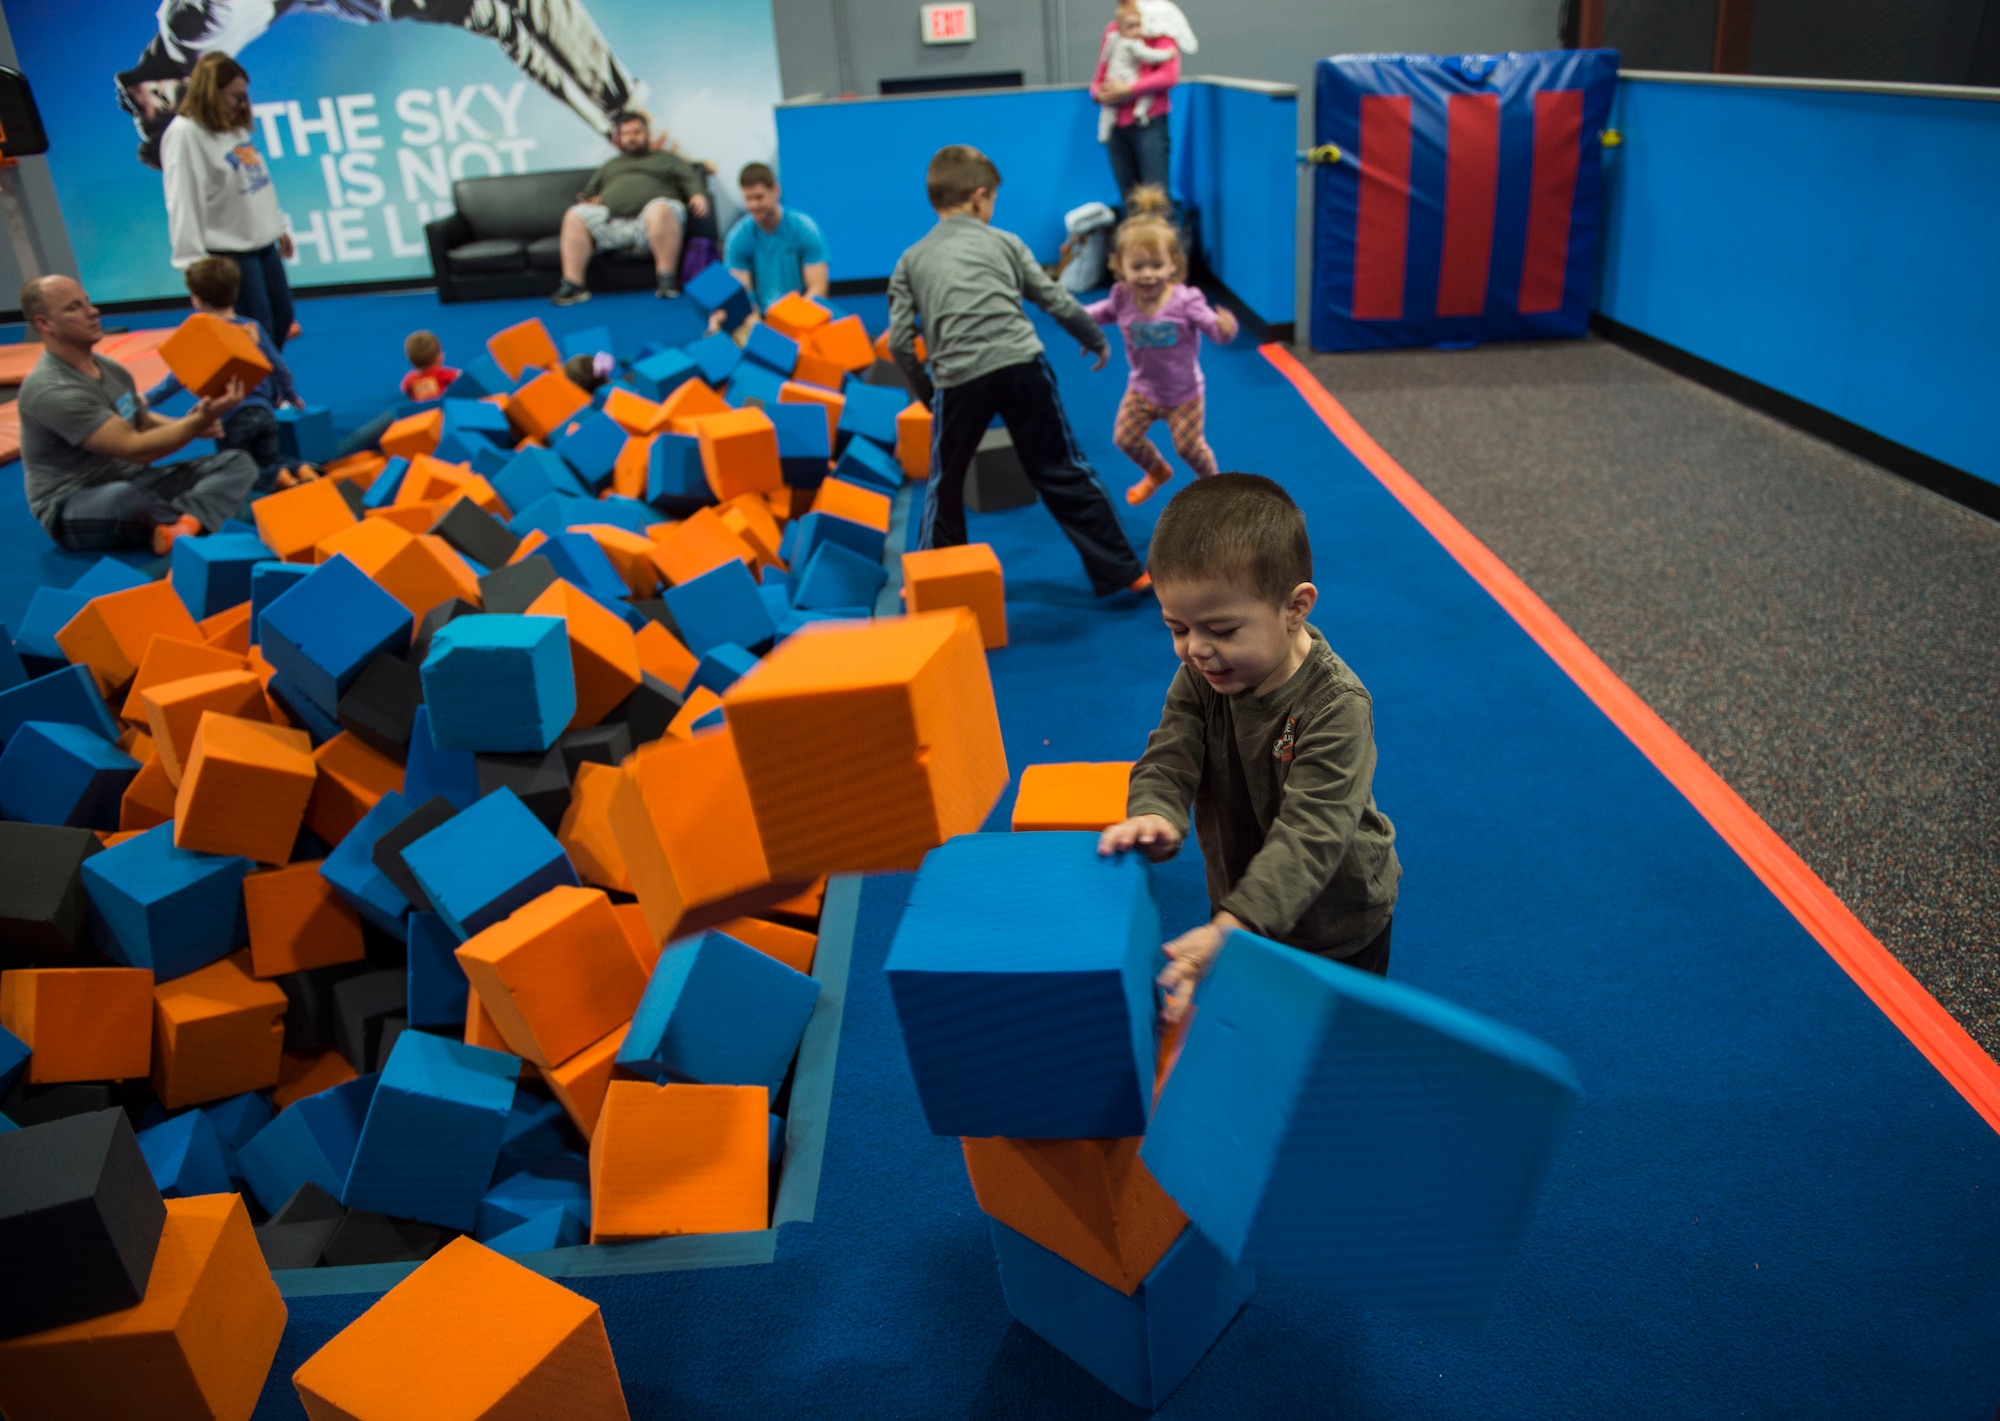 Nomar Tash, son of Master Sgt. Corey Tash, an AC-130U specialist section chief with the 1st Special Operations Maintenance Squadron, plays with blocks during a Hearts Apart event at the Sky Zone in Pensacola, Fla., Jan. 28, 2017. Hearts Apart activities focus on deployment support for Air Commandos and their families prior to the deployment and throughout. (U.S. Air Force photo by Senior Airman Krystal M. Garrett)